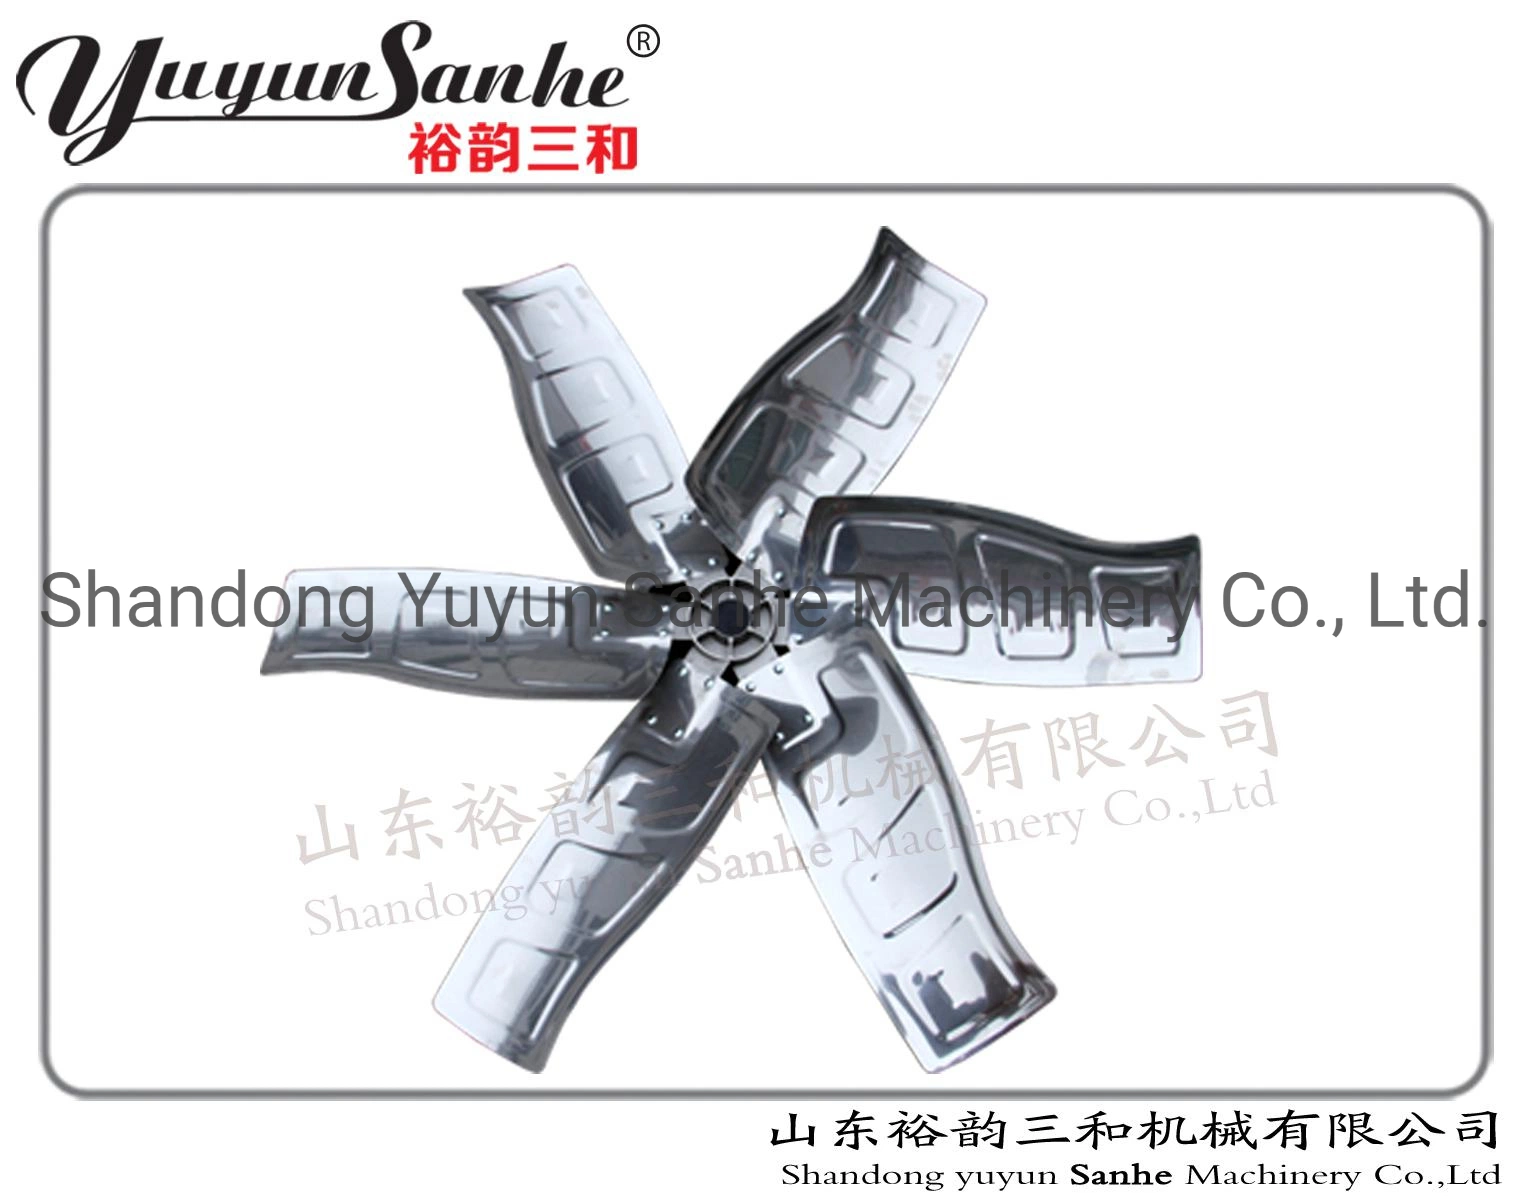 Swung Drop Hammer Heavy Duty Ventilation Exhaust Fan Air Cooling Fans Poultry Farming Equipment Industrial Air Cooling System in Galvanized Sheet